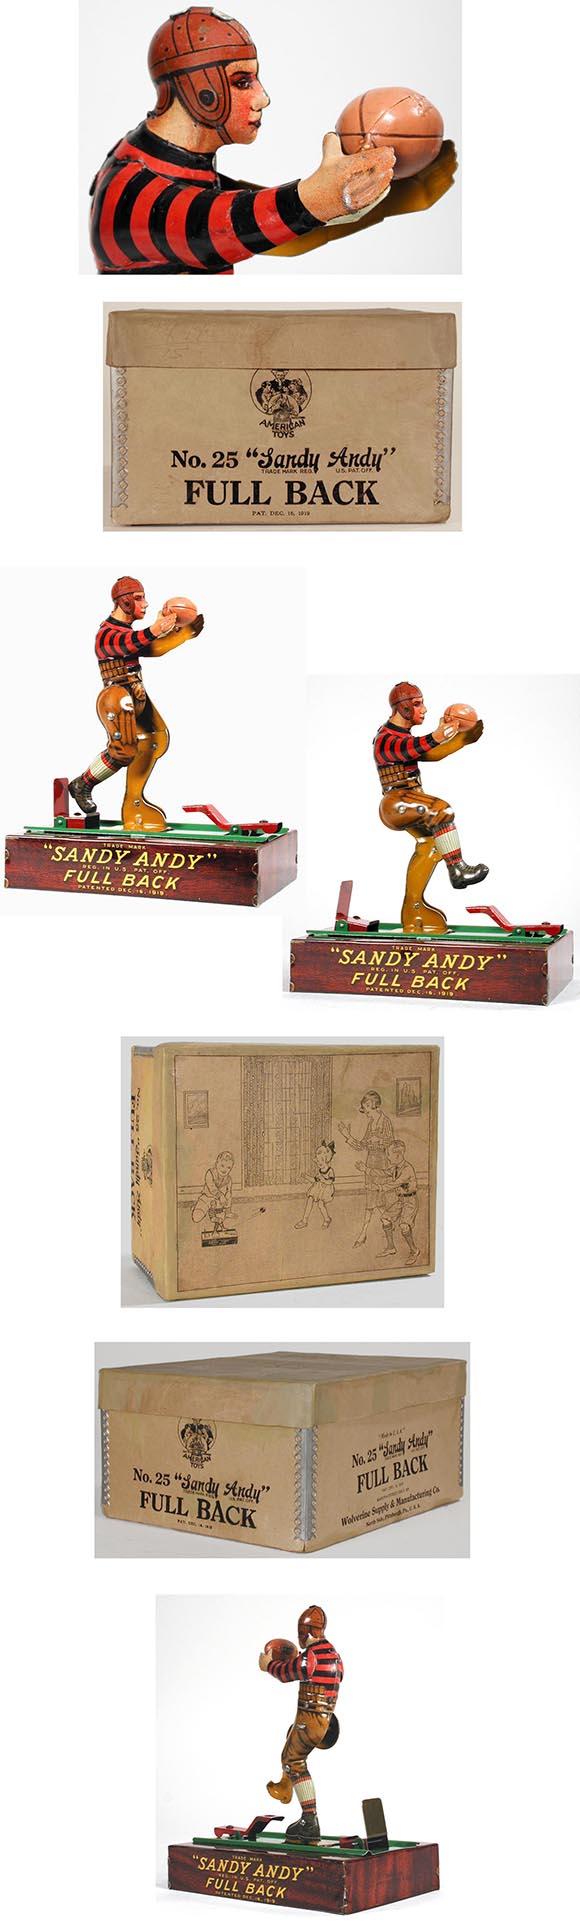 1919 Wolverine, Sandy Andy Full Back (Football Player)Â in Original Box